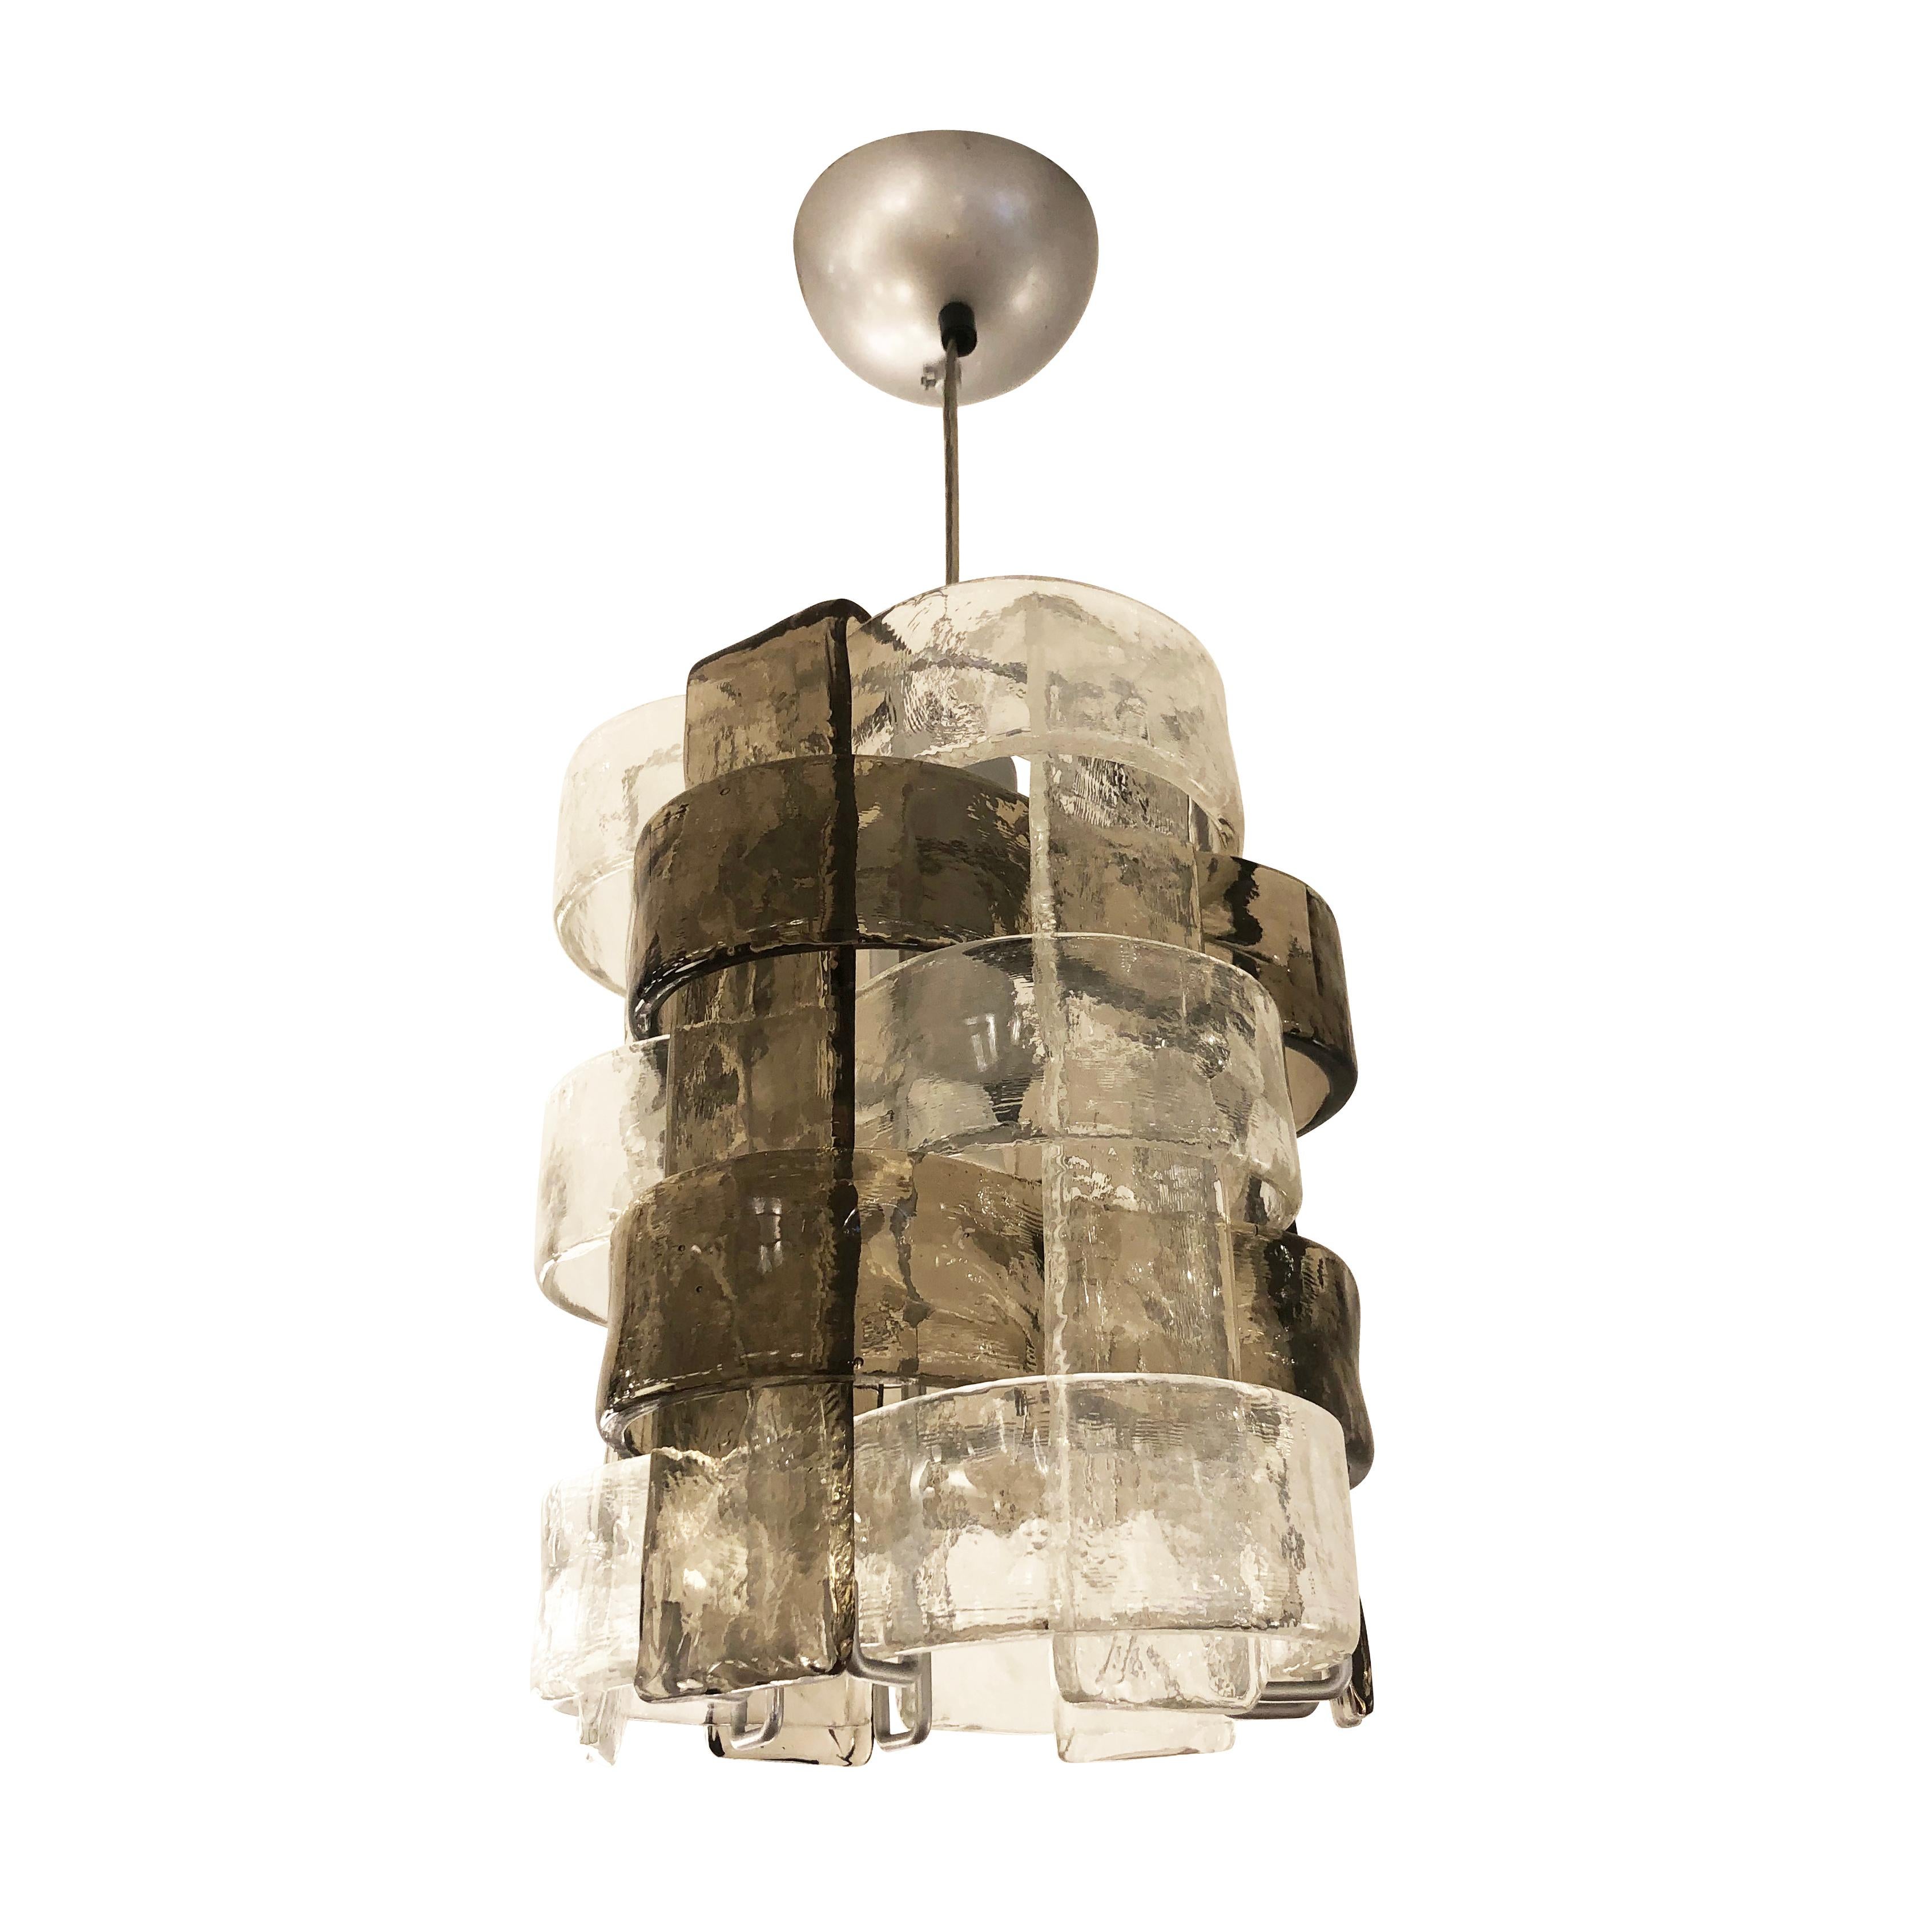 Murano glass pendant by Mazzega composed of interlacing clear and gray textured glasses. Height can be easily adjusted using the steel cable. Holds one E26 bulb.

Condition: Excellent vintage condition, minor wear consistent with age and